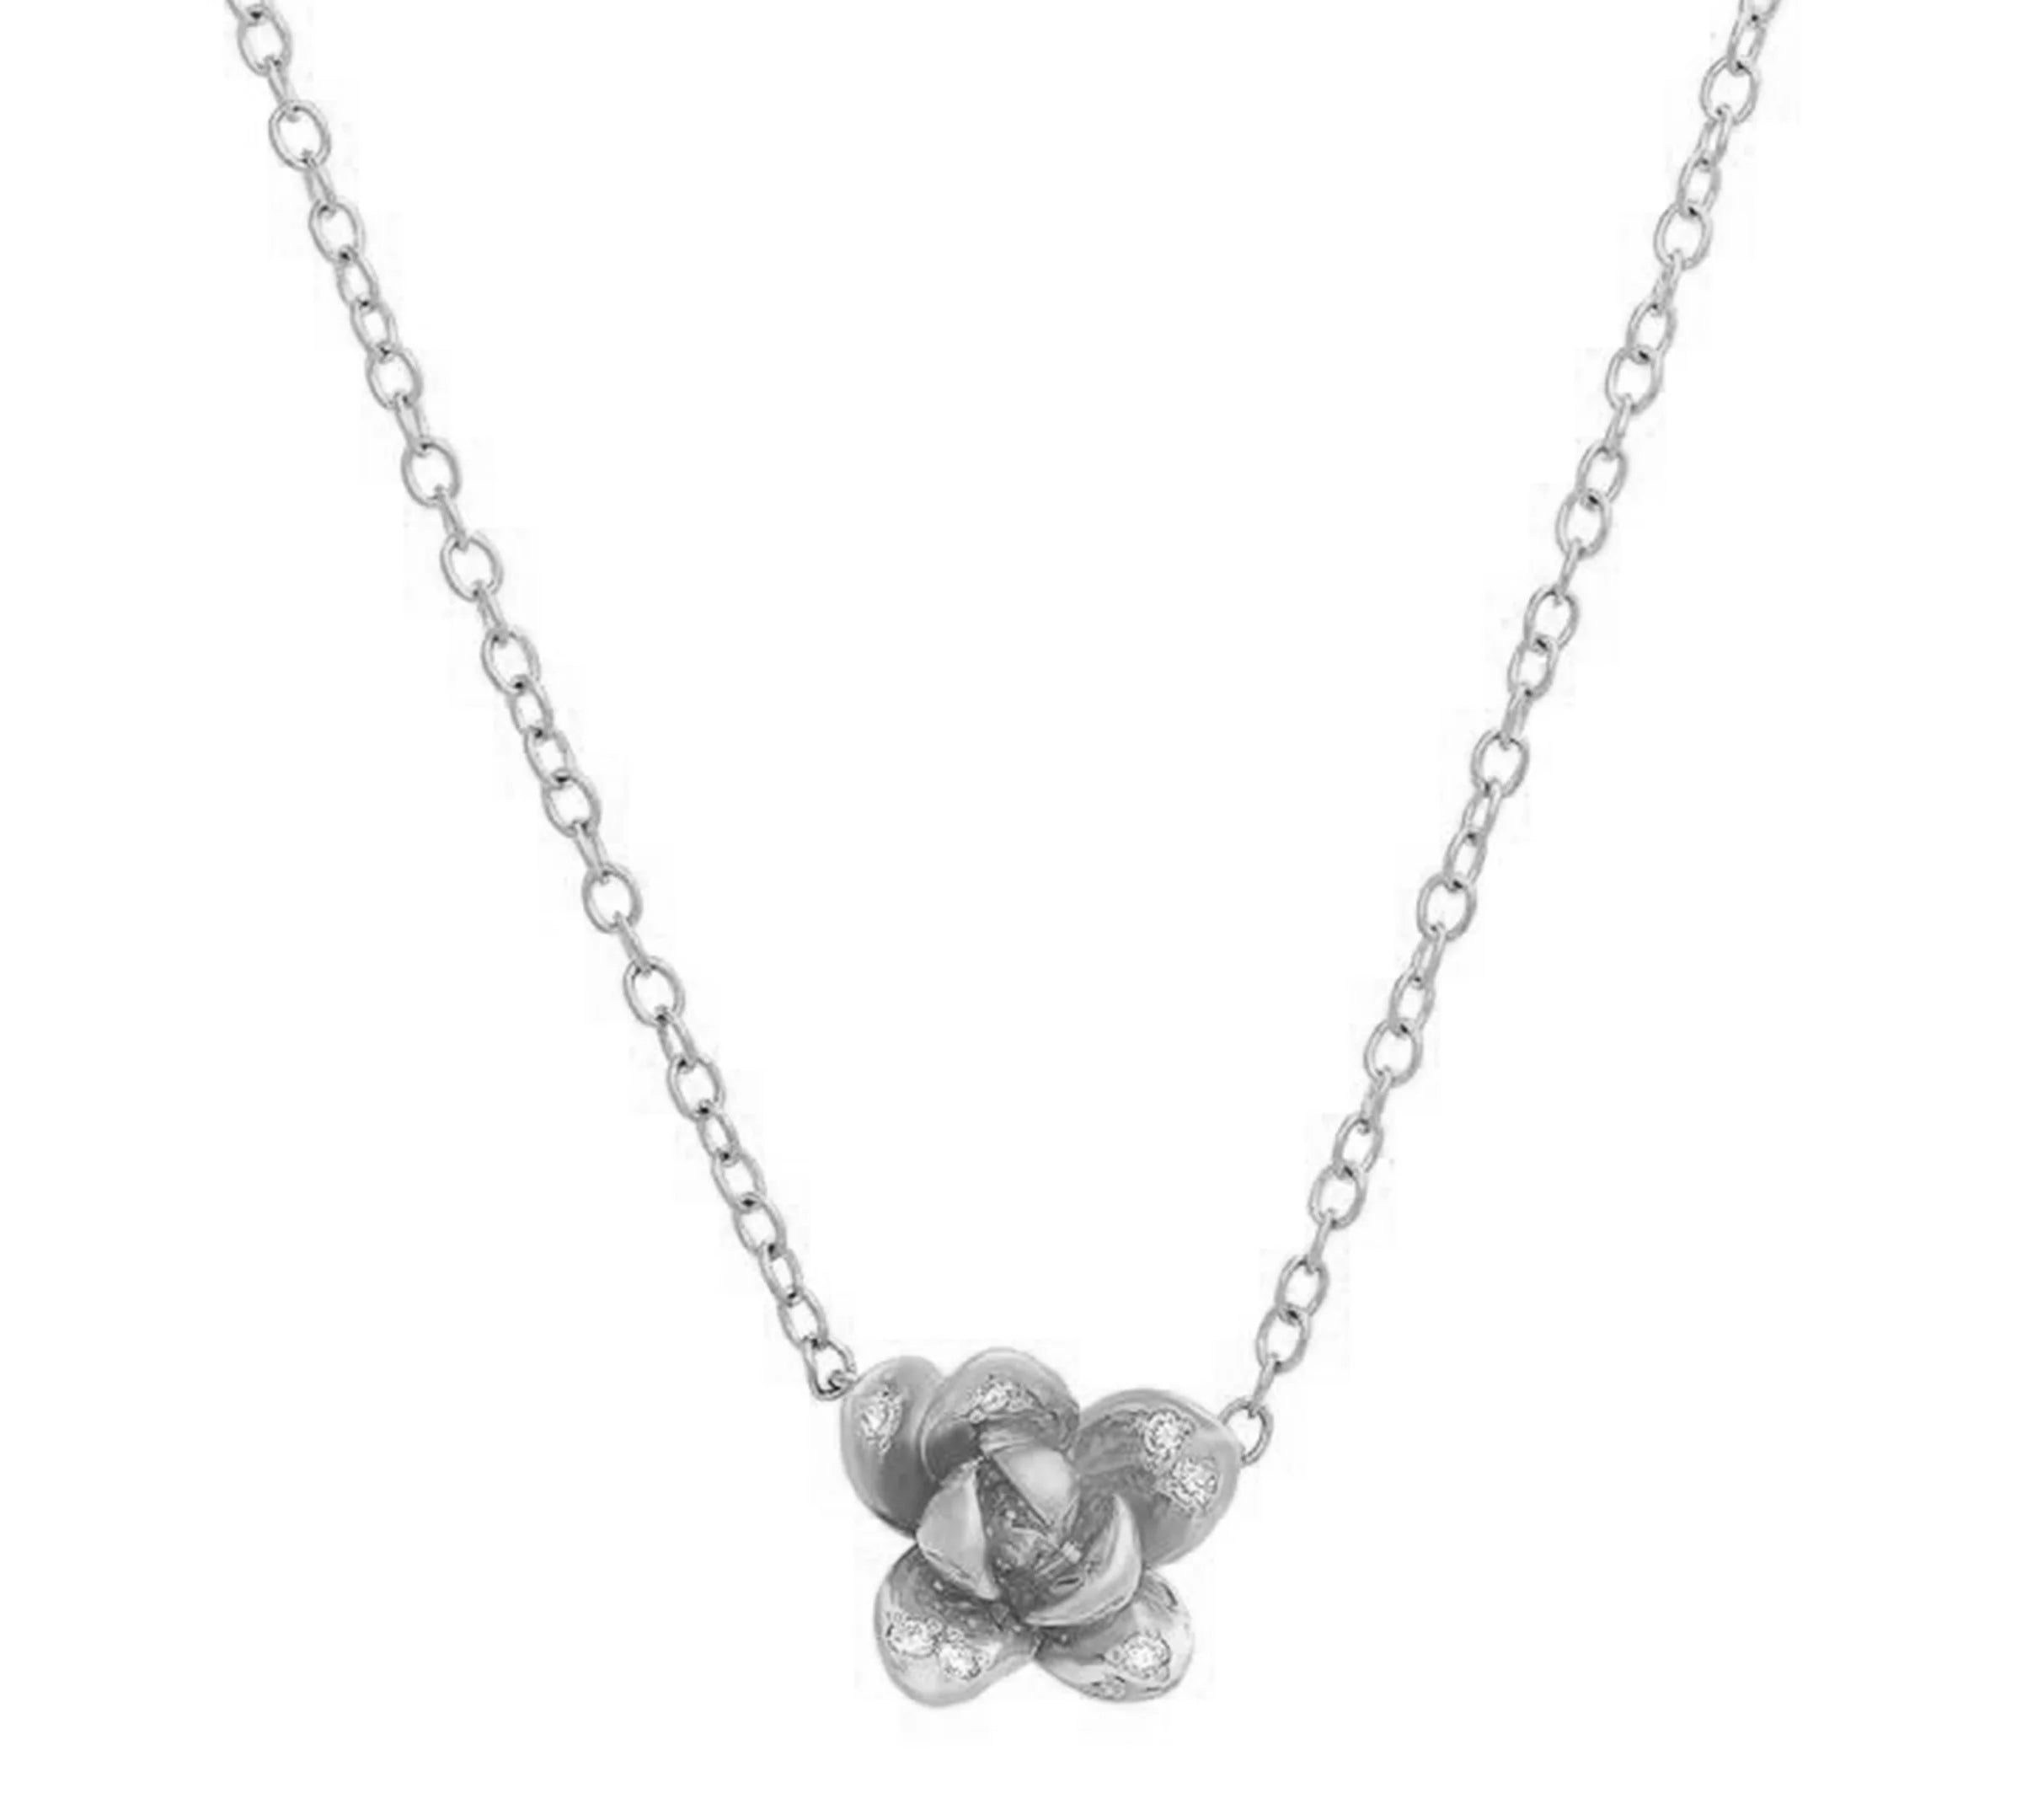 Blossom Necklace Pendant Elisabeth Bell Jewelry White Gold  